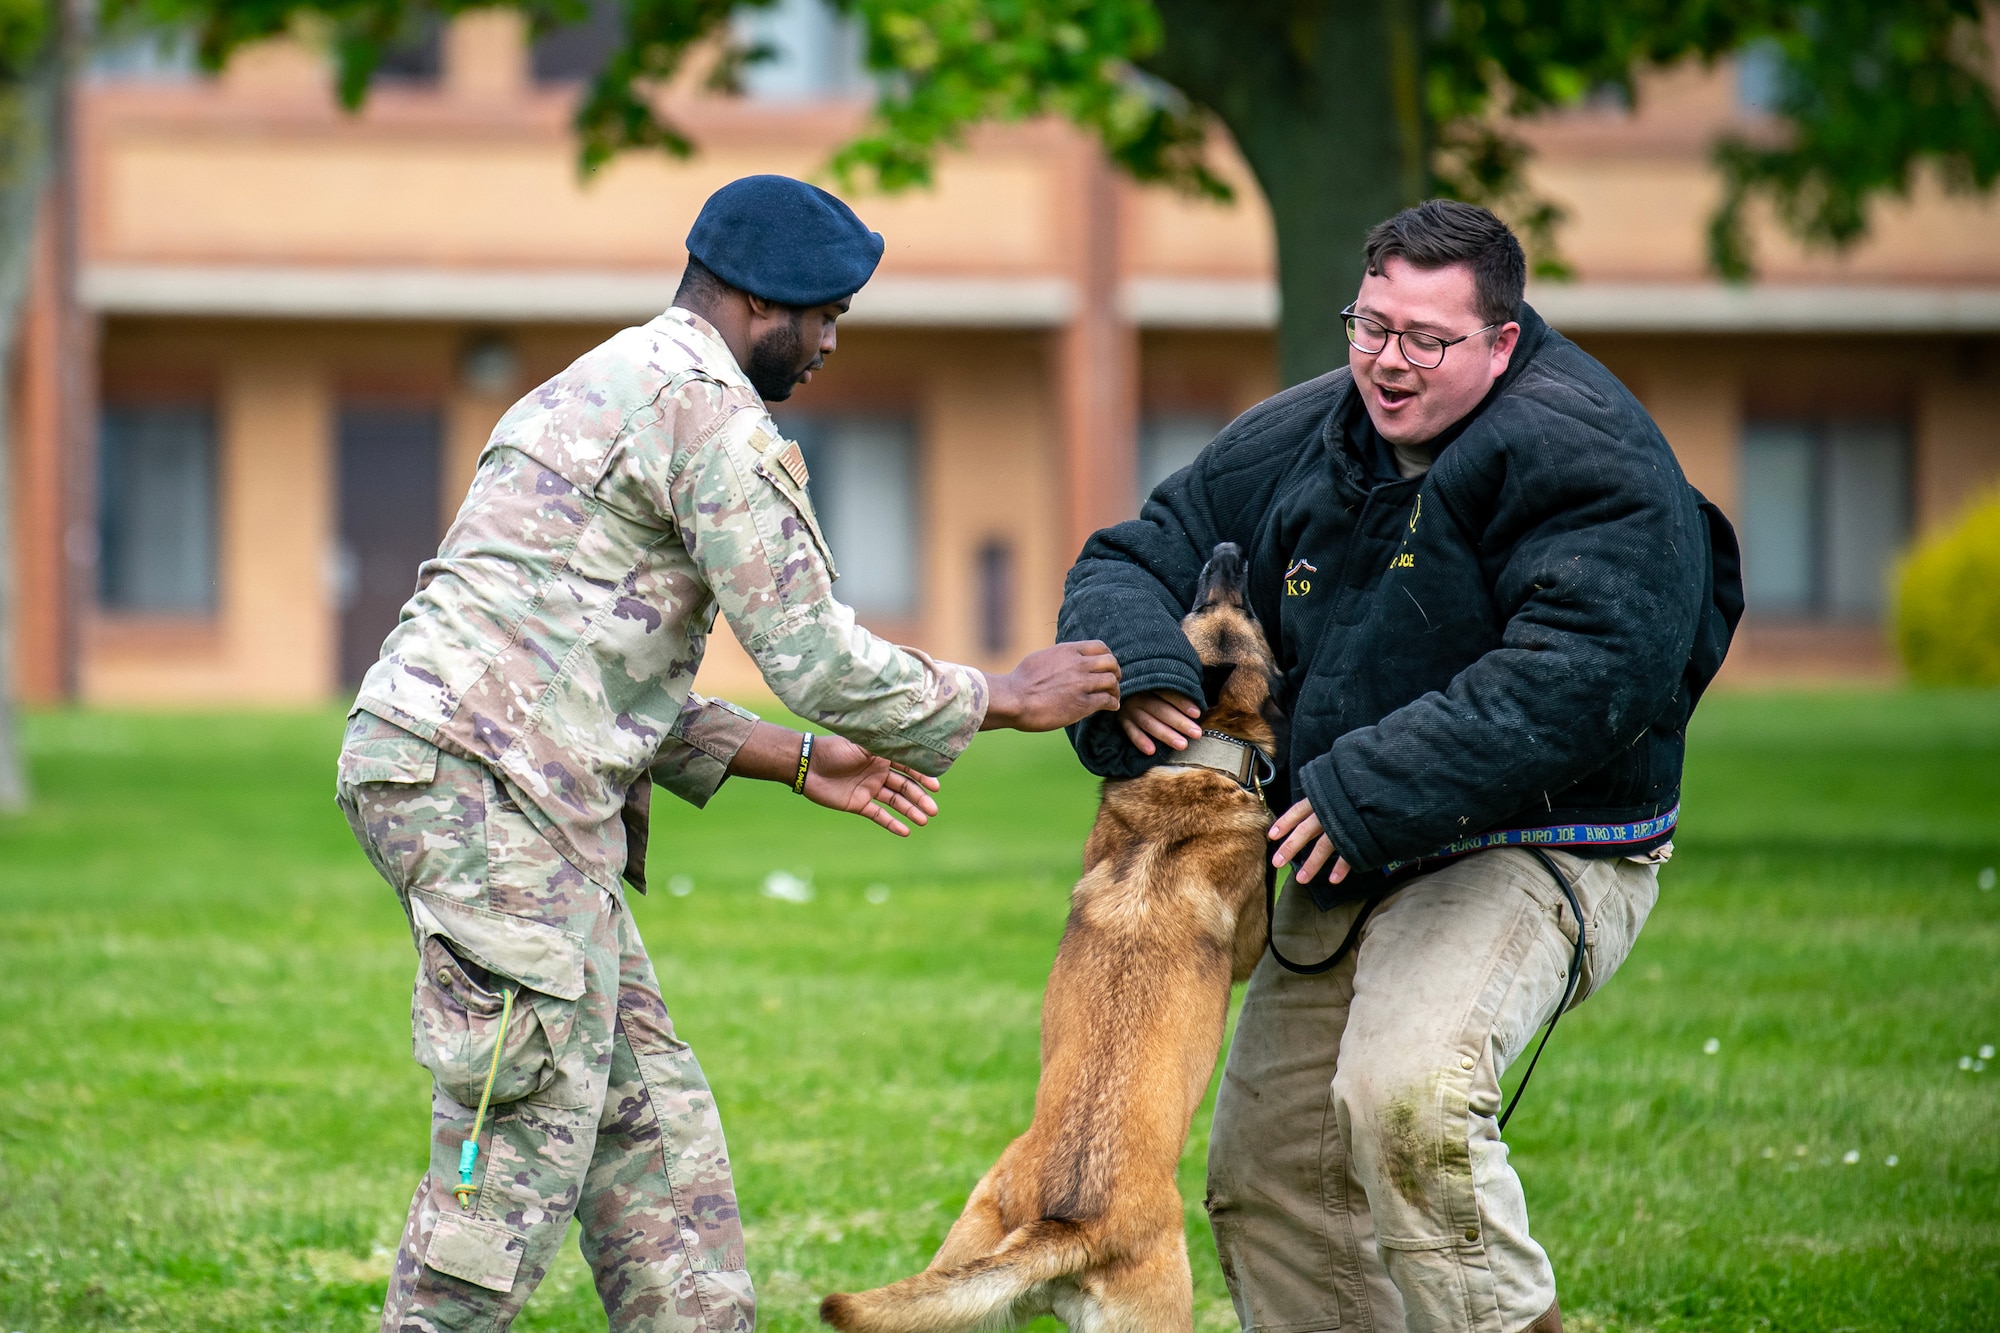 U.S. Air Force Senior Airman Jelani Bell, 100th Security Forces Squadron Military Working Dog handler, and MWD Uta, apprehend a simulated suspect as part of a demonstration at RAF Alconbury, England, May 18, 2023. The demonstration was a part of National Police Week where members from SFS engaged with and demonstrated police capabilities to students from Alconbury Elementary school. (U.S. Air Force photo by Staff Sgt. Eugene Oliver)